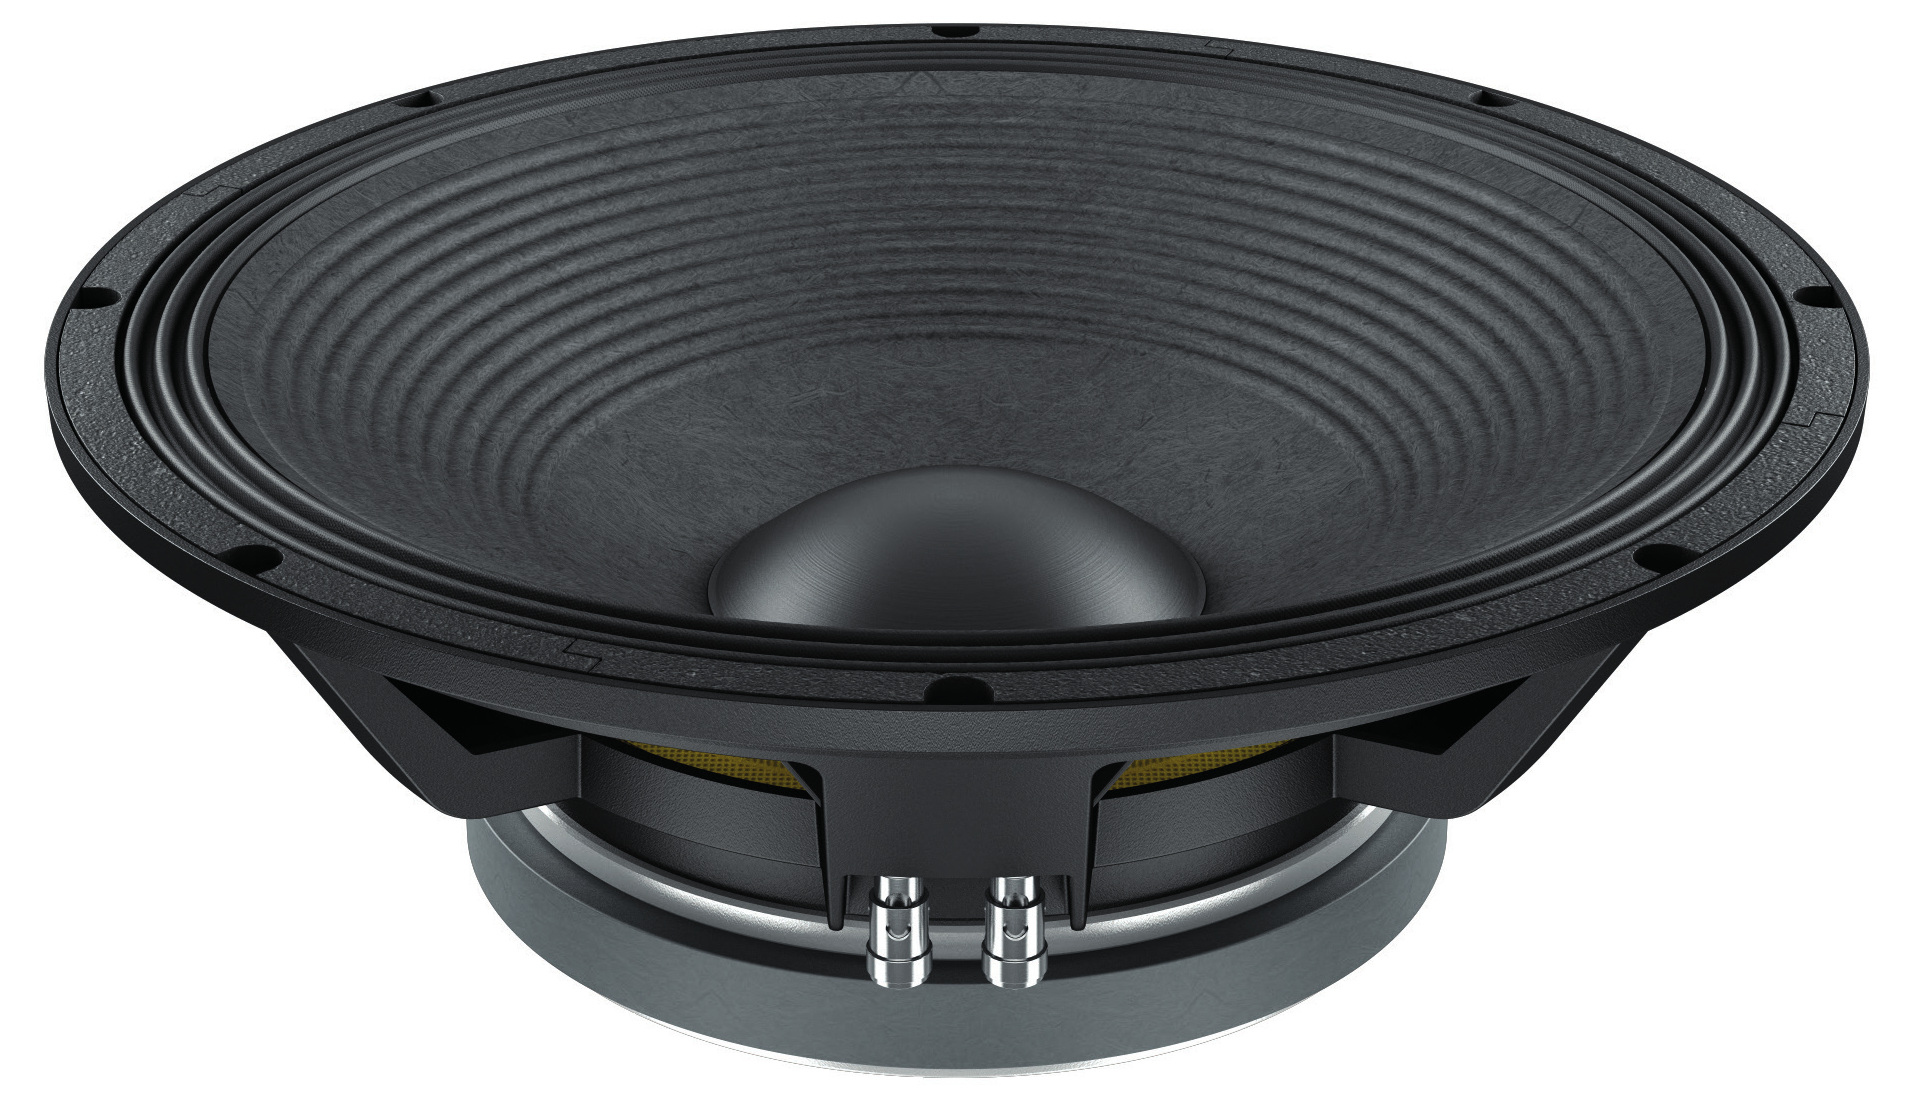 LaVoce WXF15.800 Woofer